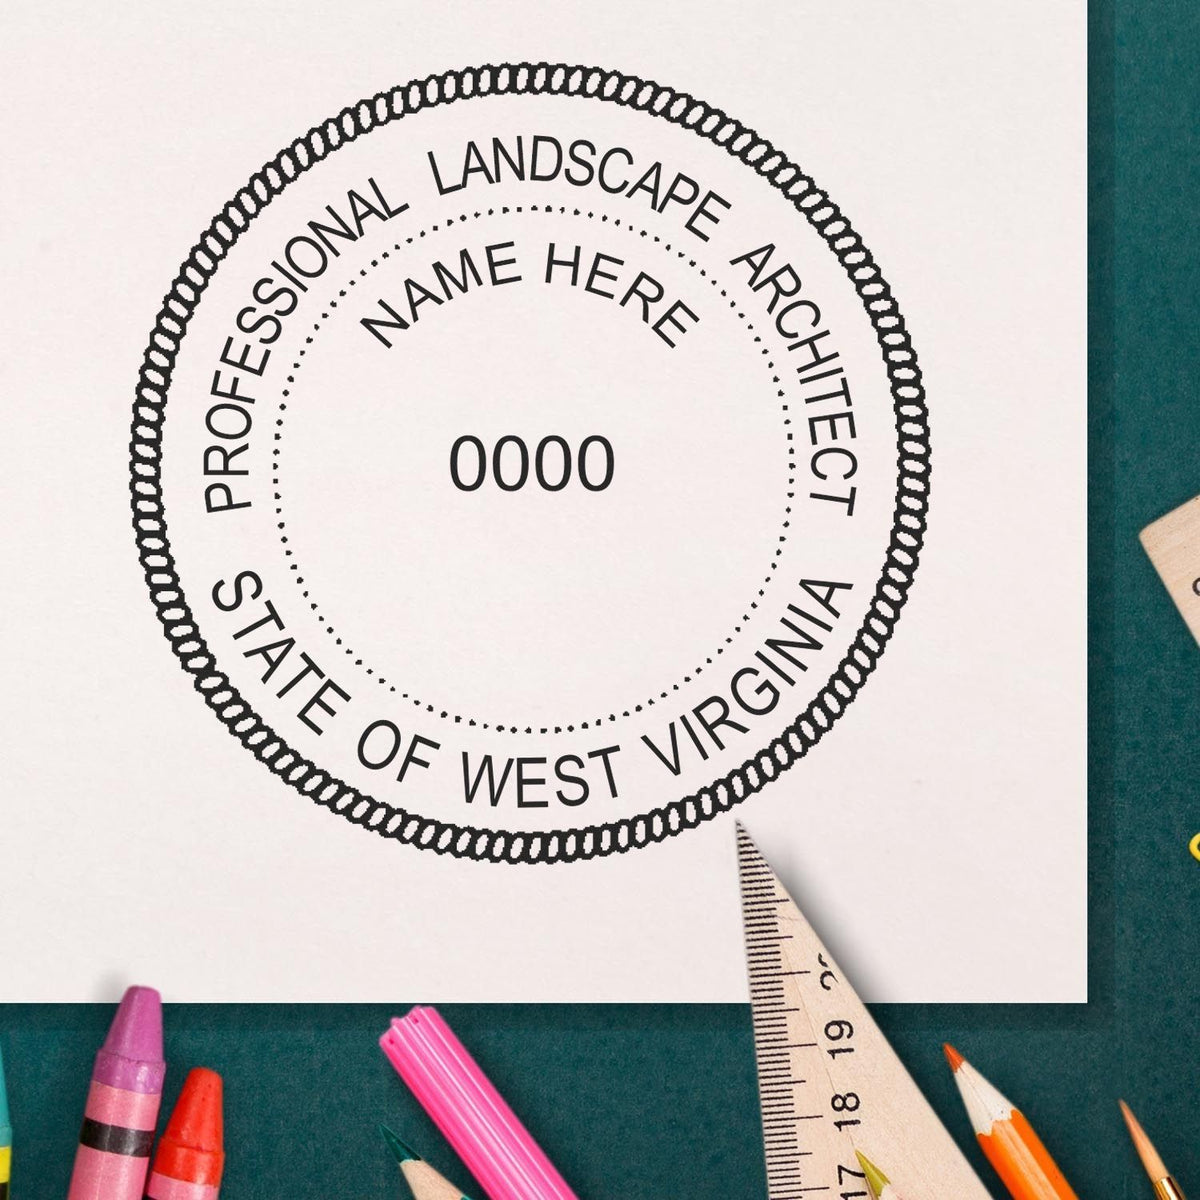 Slim Pre-Inked West Virginia Landscape Architect Seal Stamp in use photo showing a stamped imprint of the Slim Pre-Inked West Virginia Landscape Architect Seal Stamp